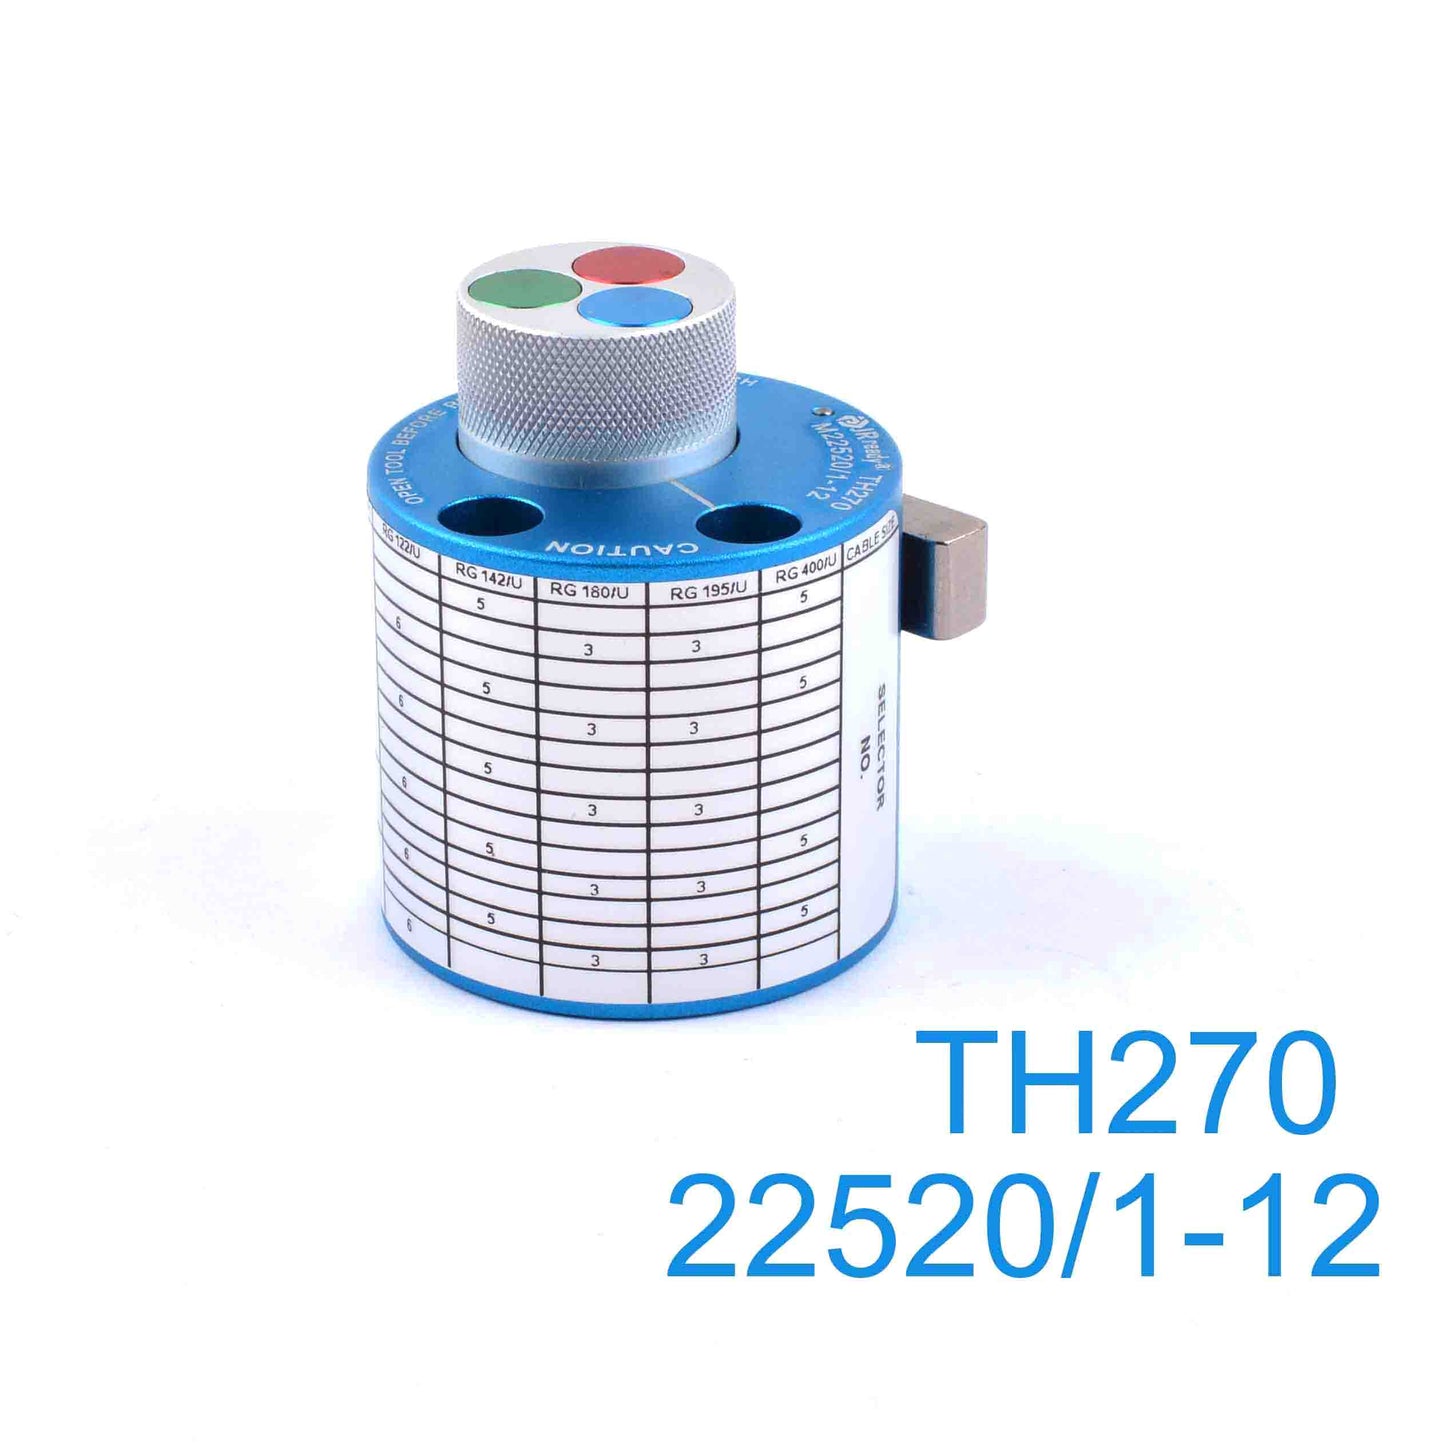 TH270 Turret Head positioner M22520/1-12 contacts terminated to RG-122, RG-142, RG-180, RG-195, and RG-400 cables